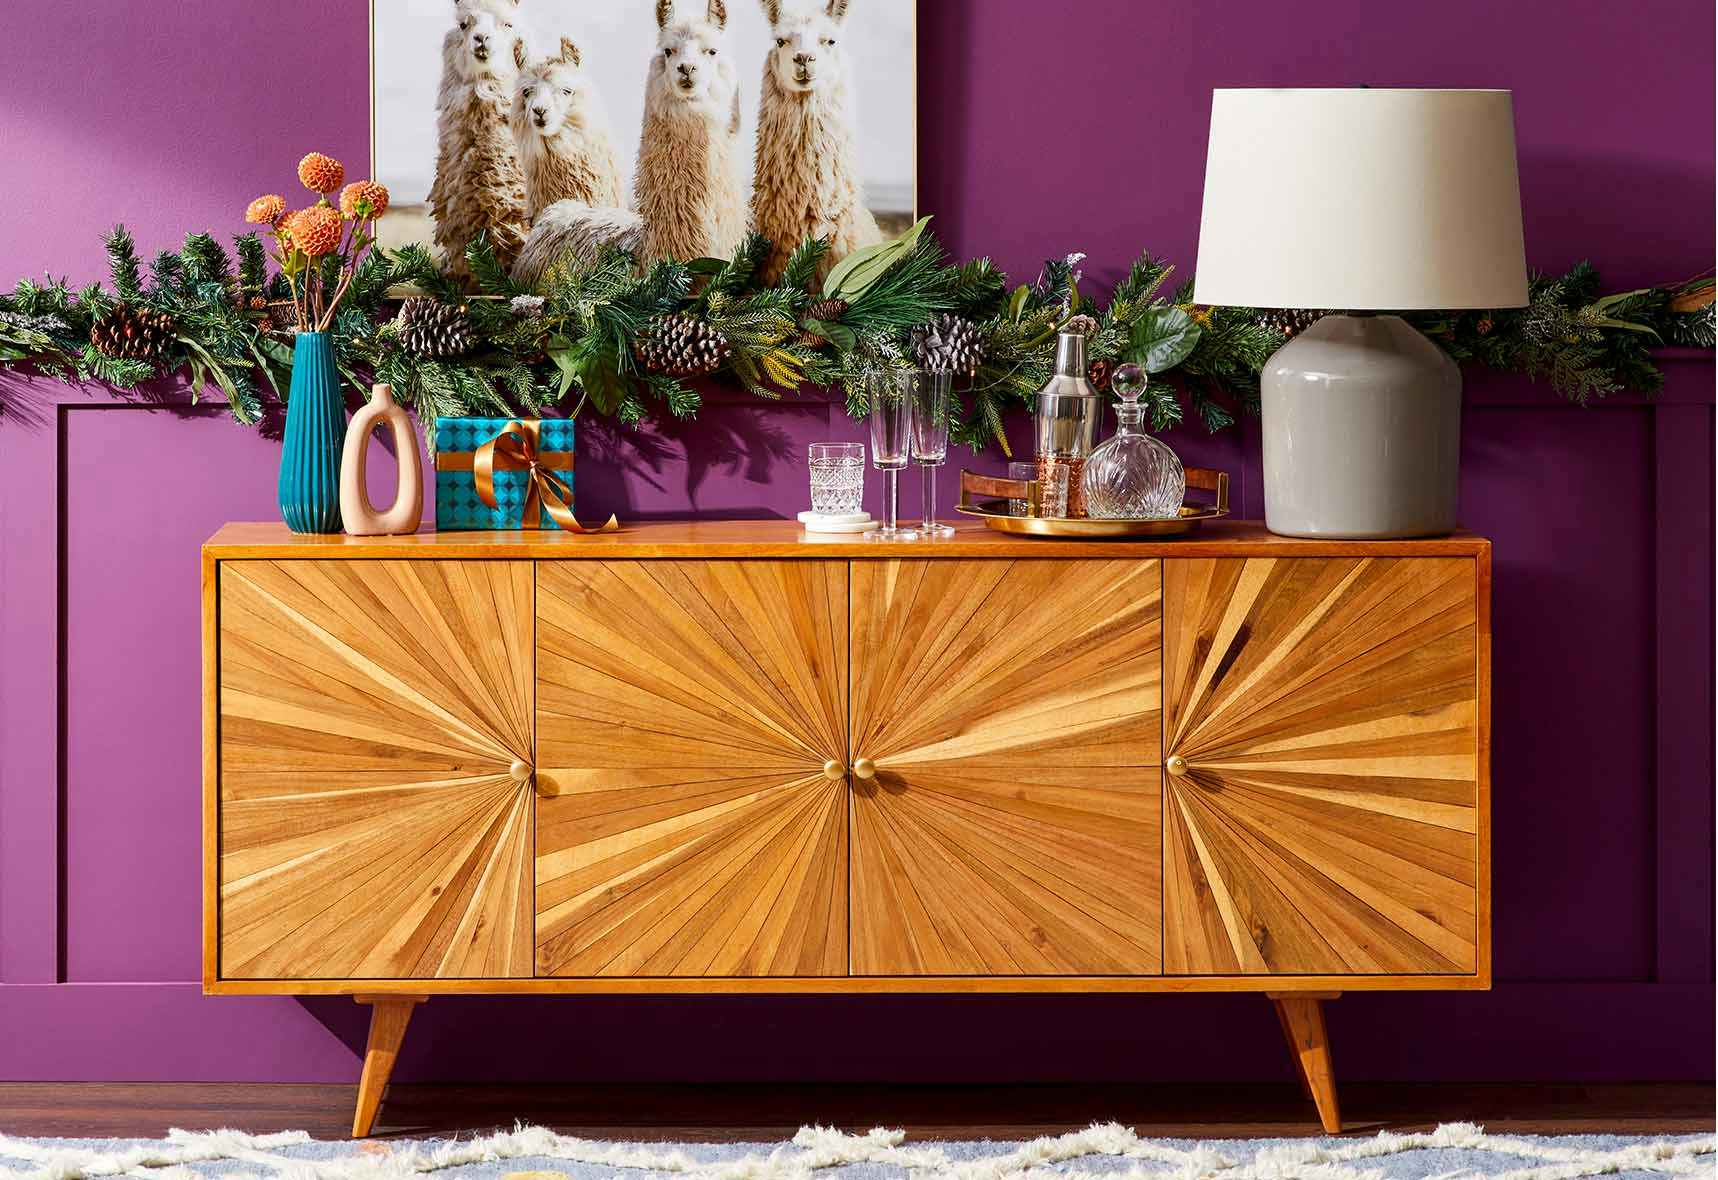 The 9 Best Places to Buy Furniture on a Budget - The Krazy Coupon Lady